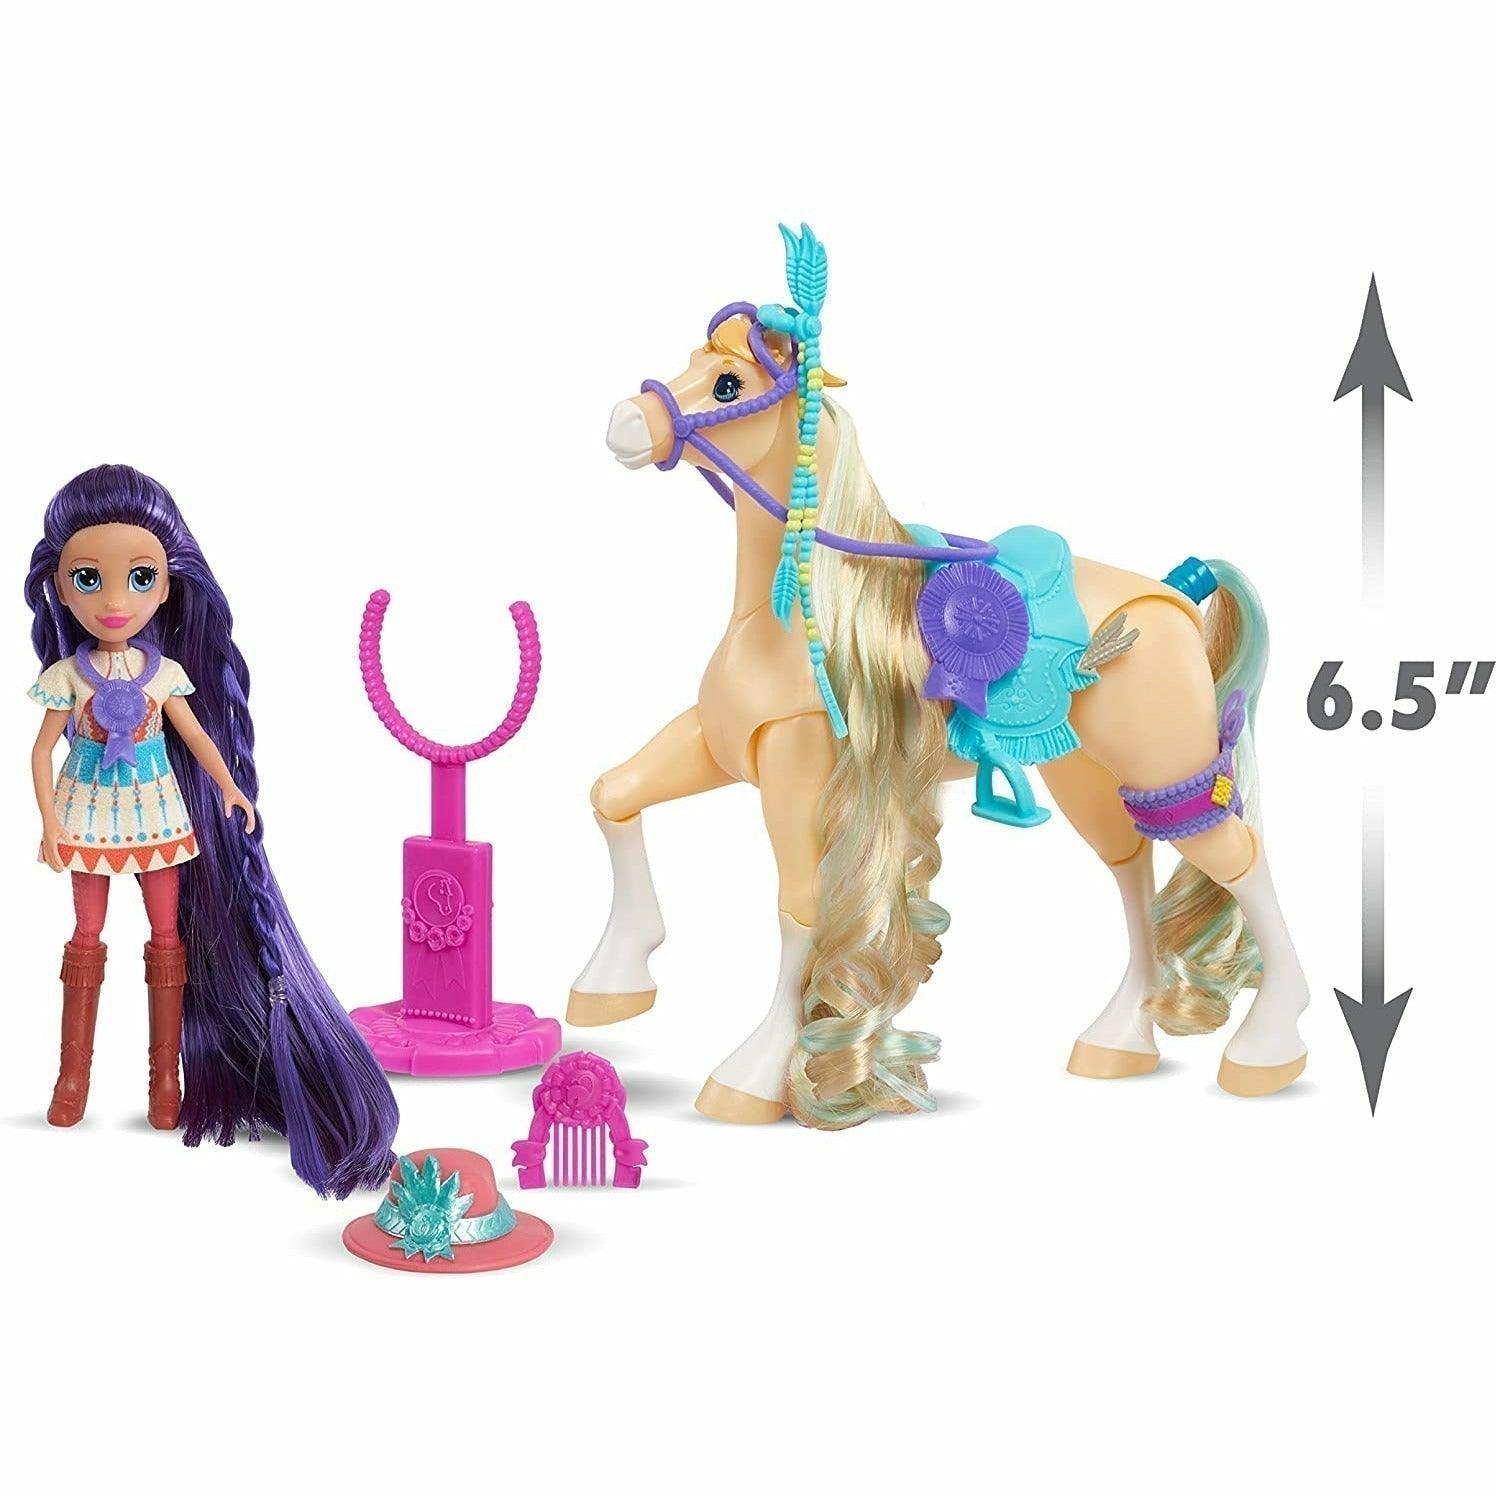 Just Play Winner's Stable 11 Piece Set Includes 5-Inch Kimi Articulated Small Doll & 7-Inch Kola Articulated Horse - BumbleToys - 5-7 Years, Dolls, Fashion Dolls & Accessories, Girls, OXE, Pre-Order